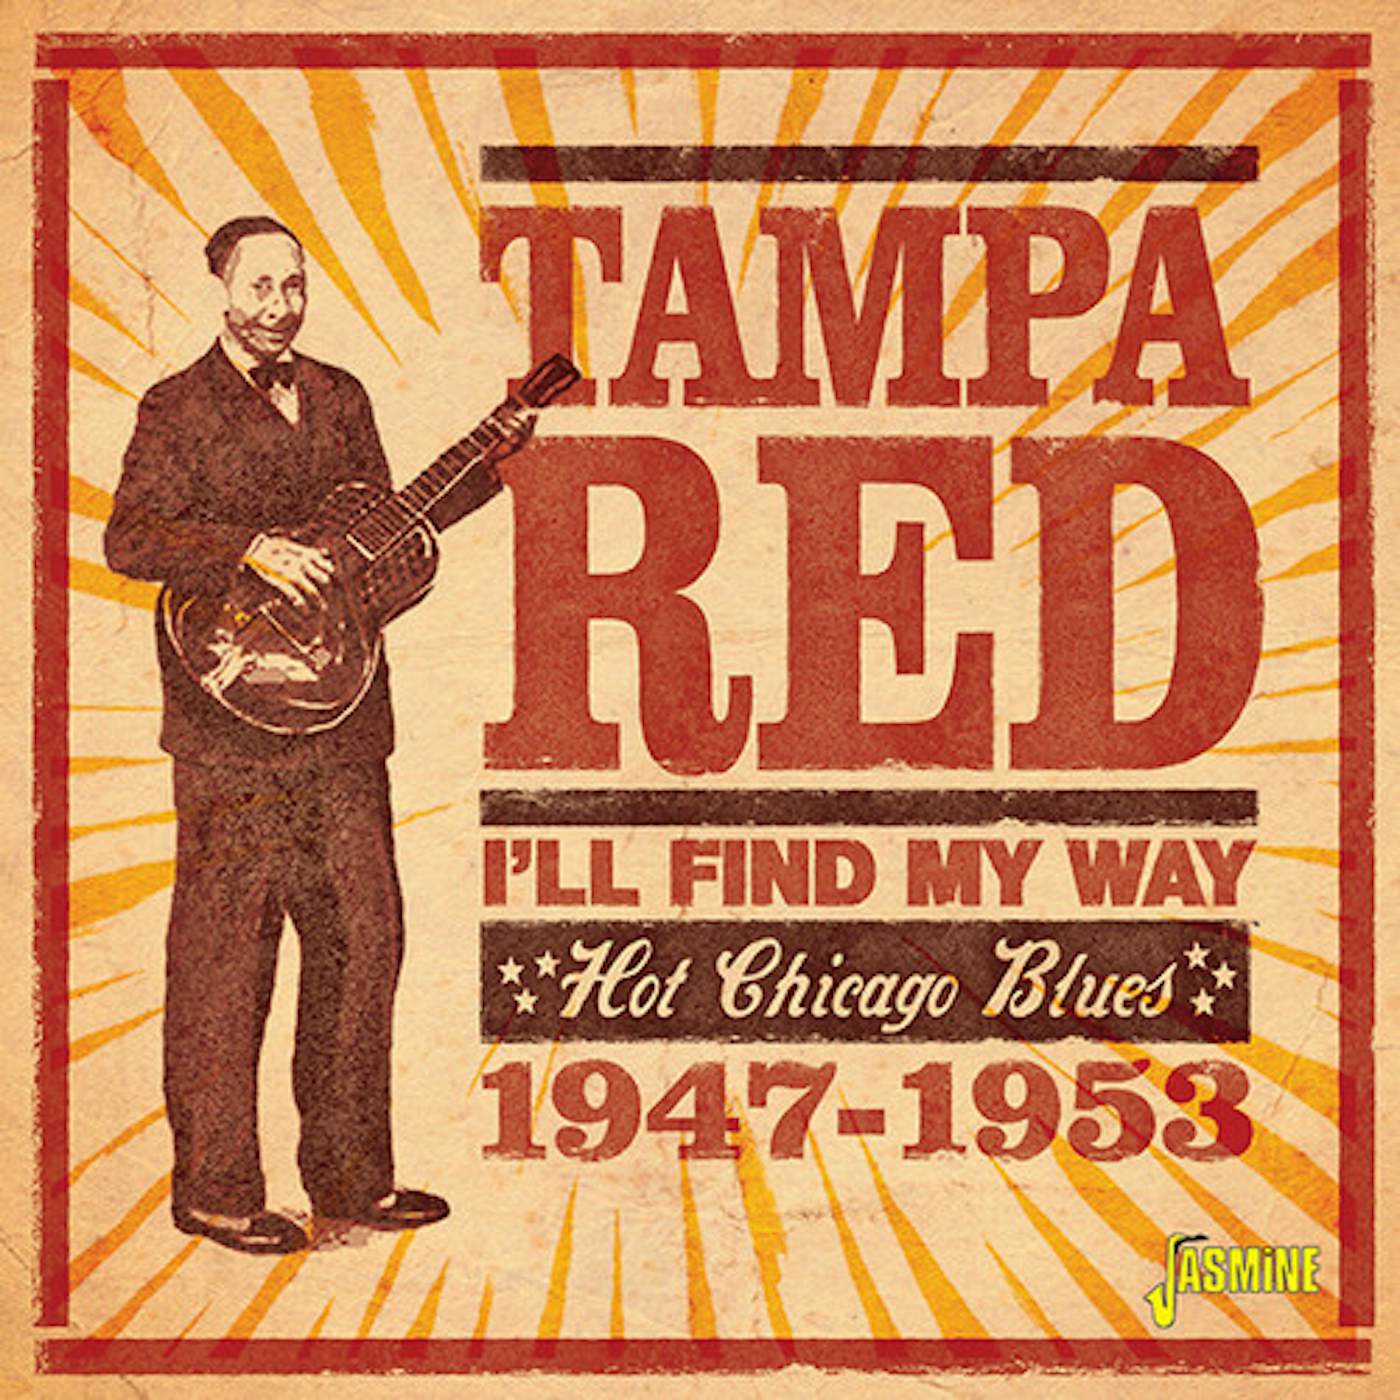 Tampa Red I'LL FIND MY WAY: HOT CHICAGO BLUES 1947-1953 CD